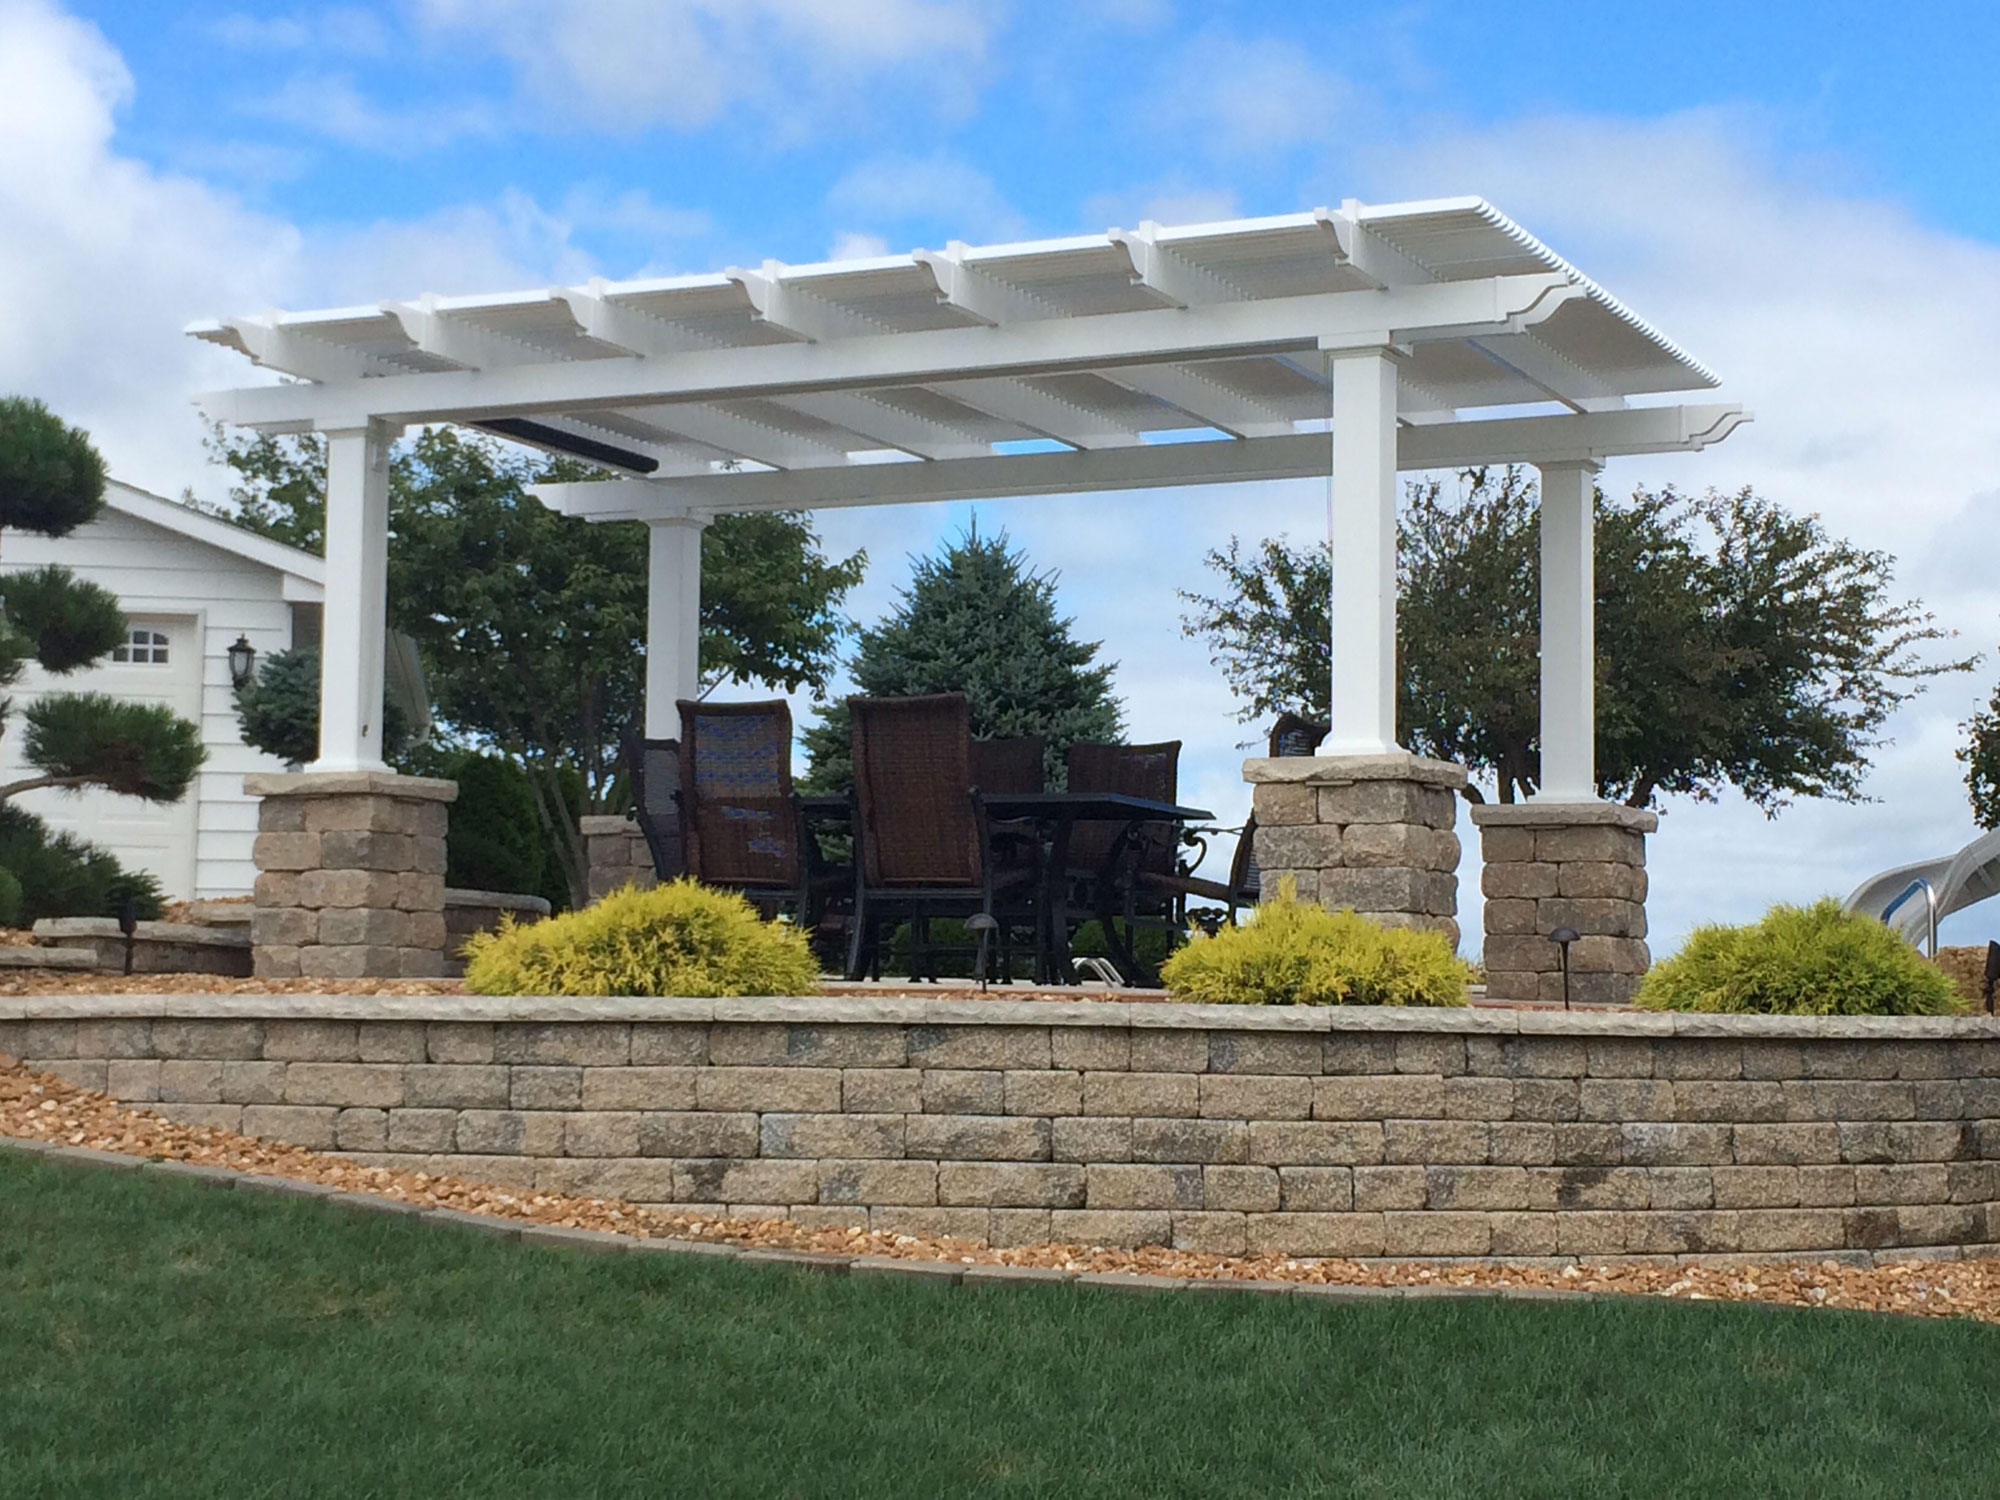 This white pergola stands alone above an outdoor eating area. There are green shrubs on the sides of the poles, and there are trees in the yard.